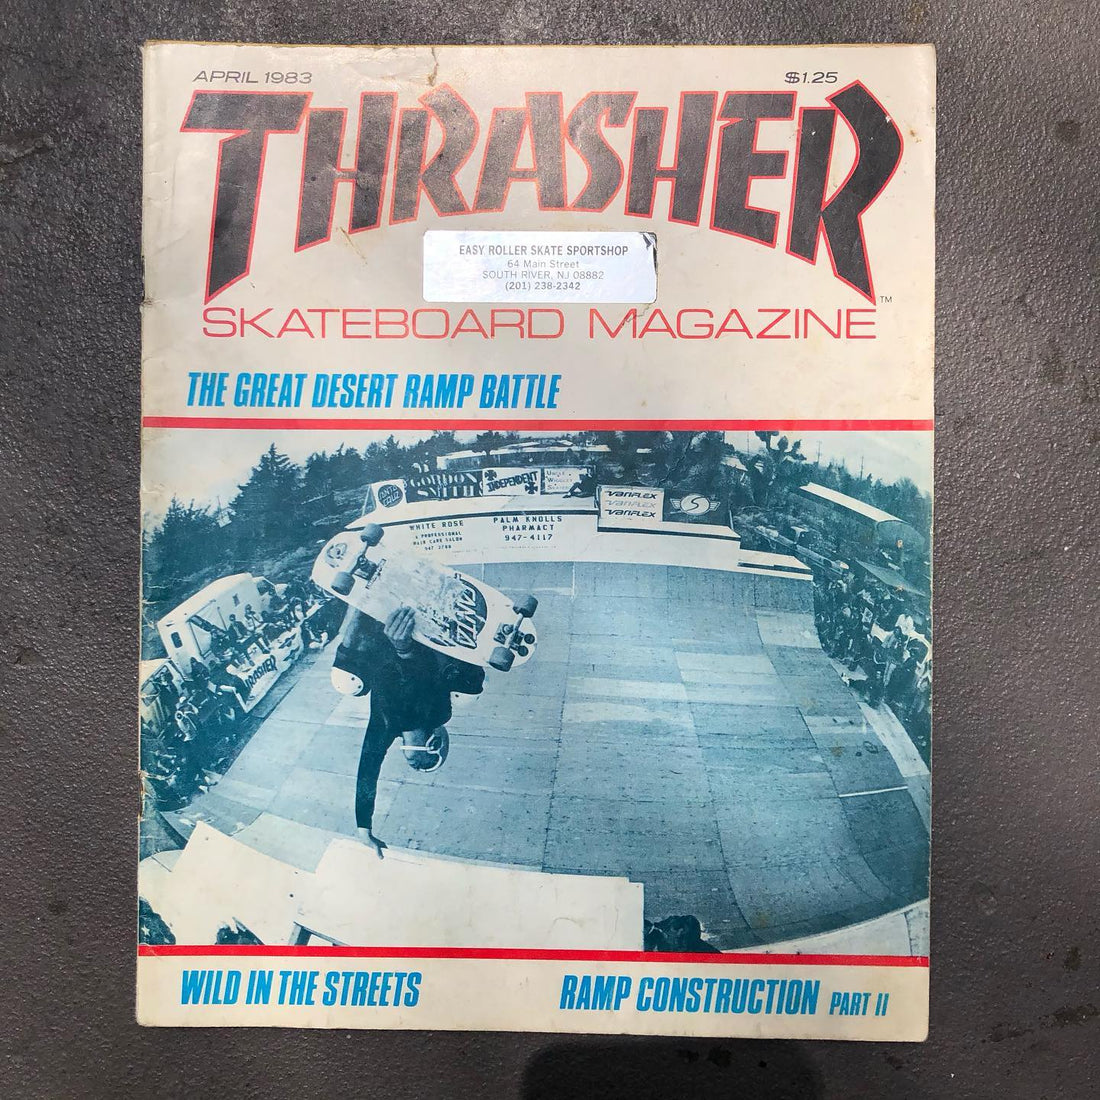 This is my first Thrasher.
Bought...